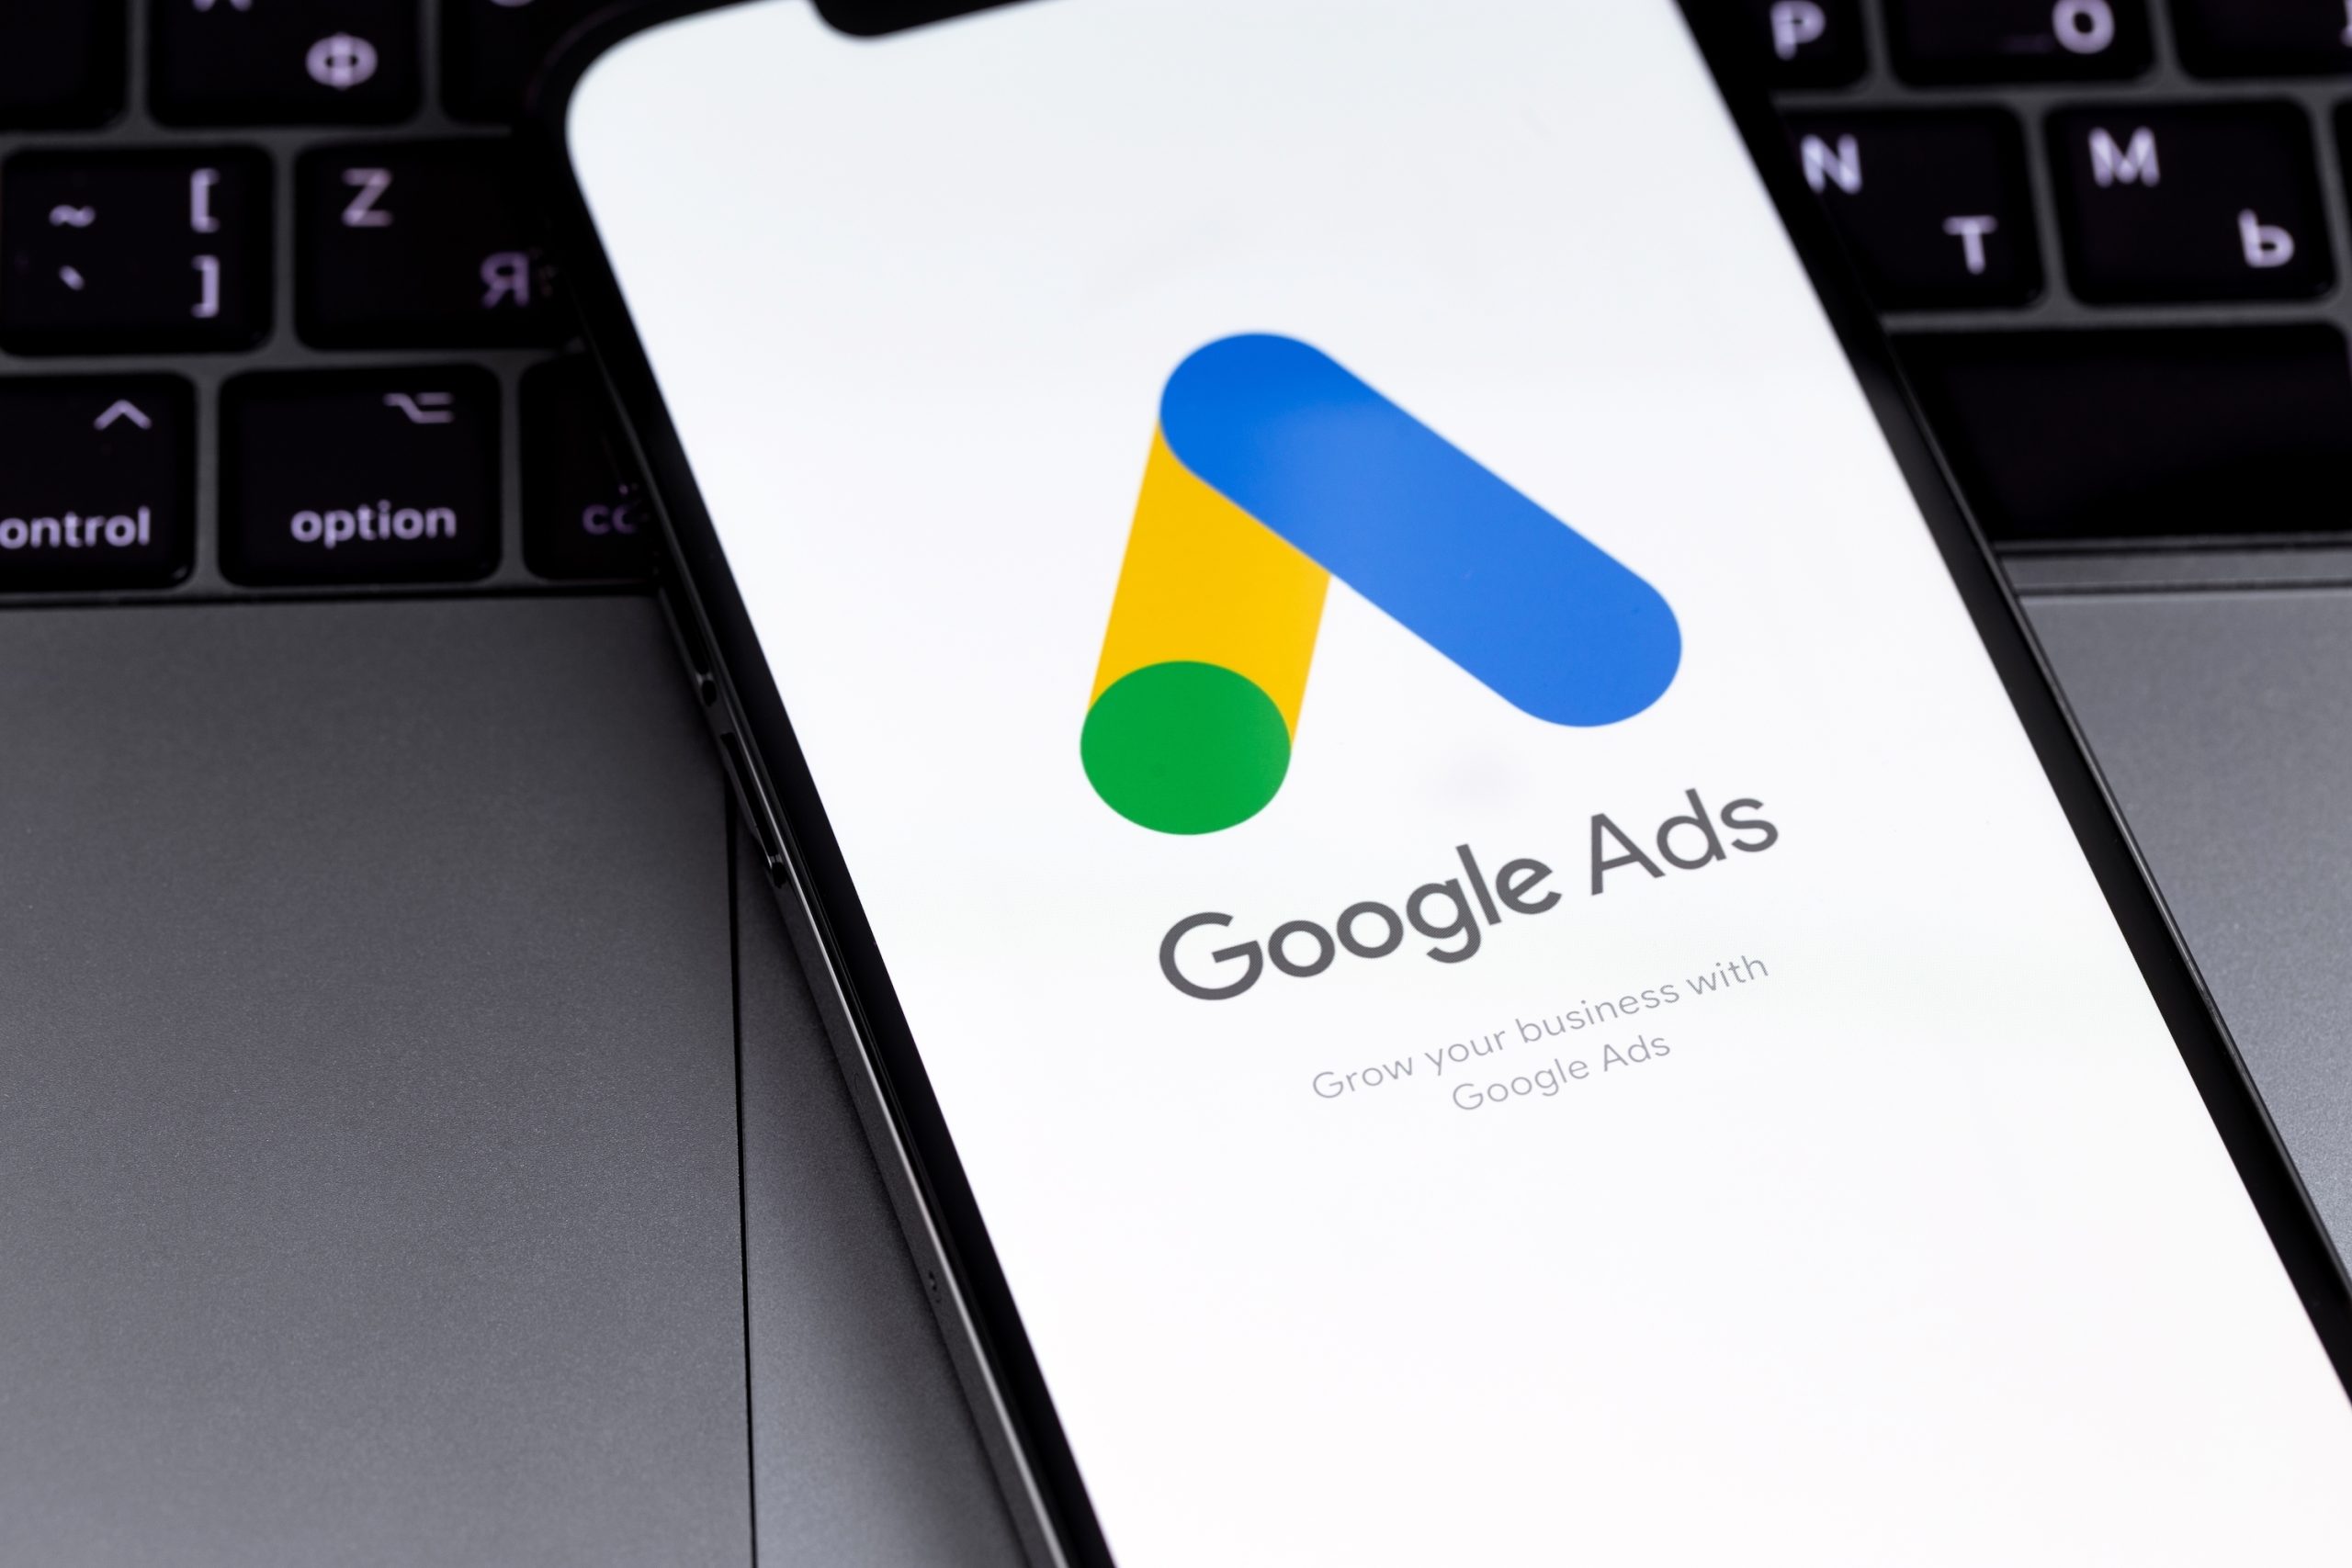 Google Ads Users Experience Temporary Disruption To Services